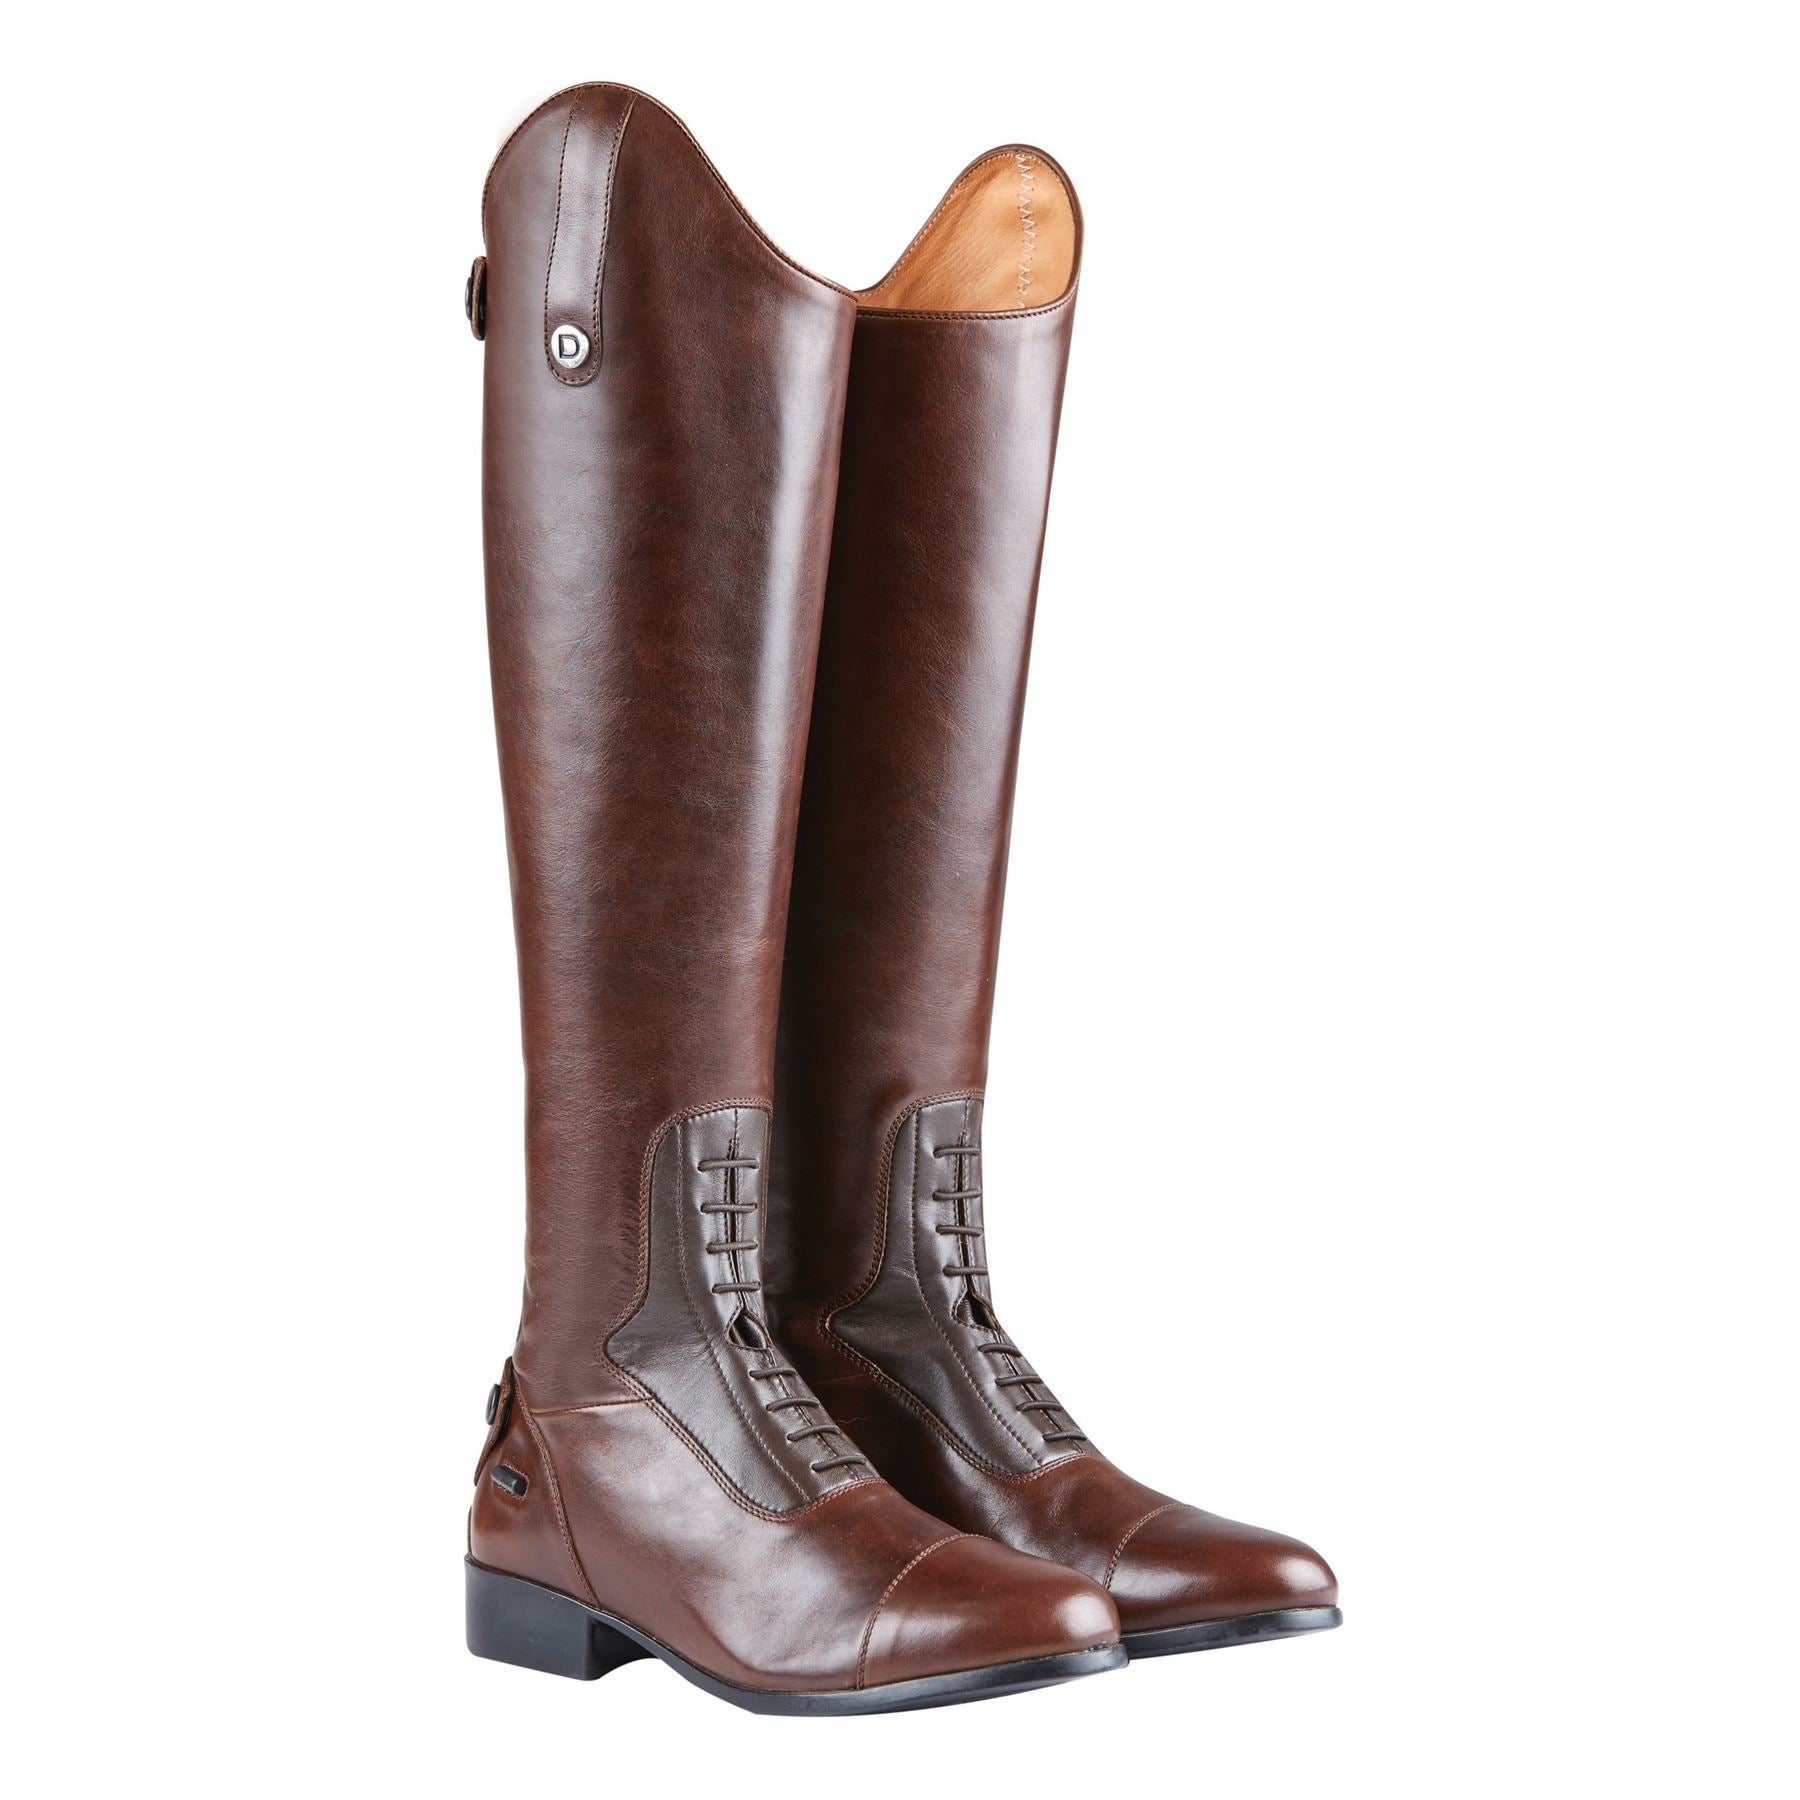 Dublin Galtymore Tall Field Boots - Just Horse Riders